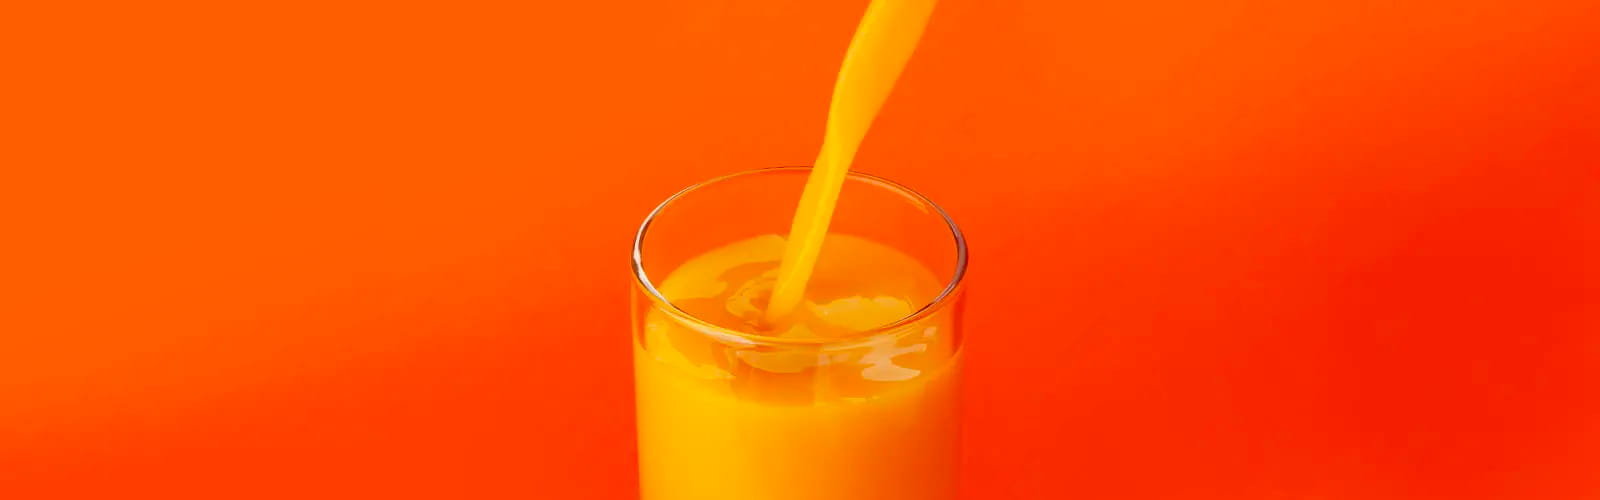 A glass of orange juice being poured